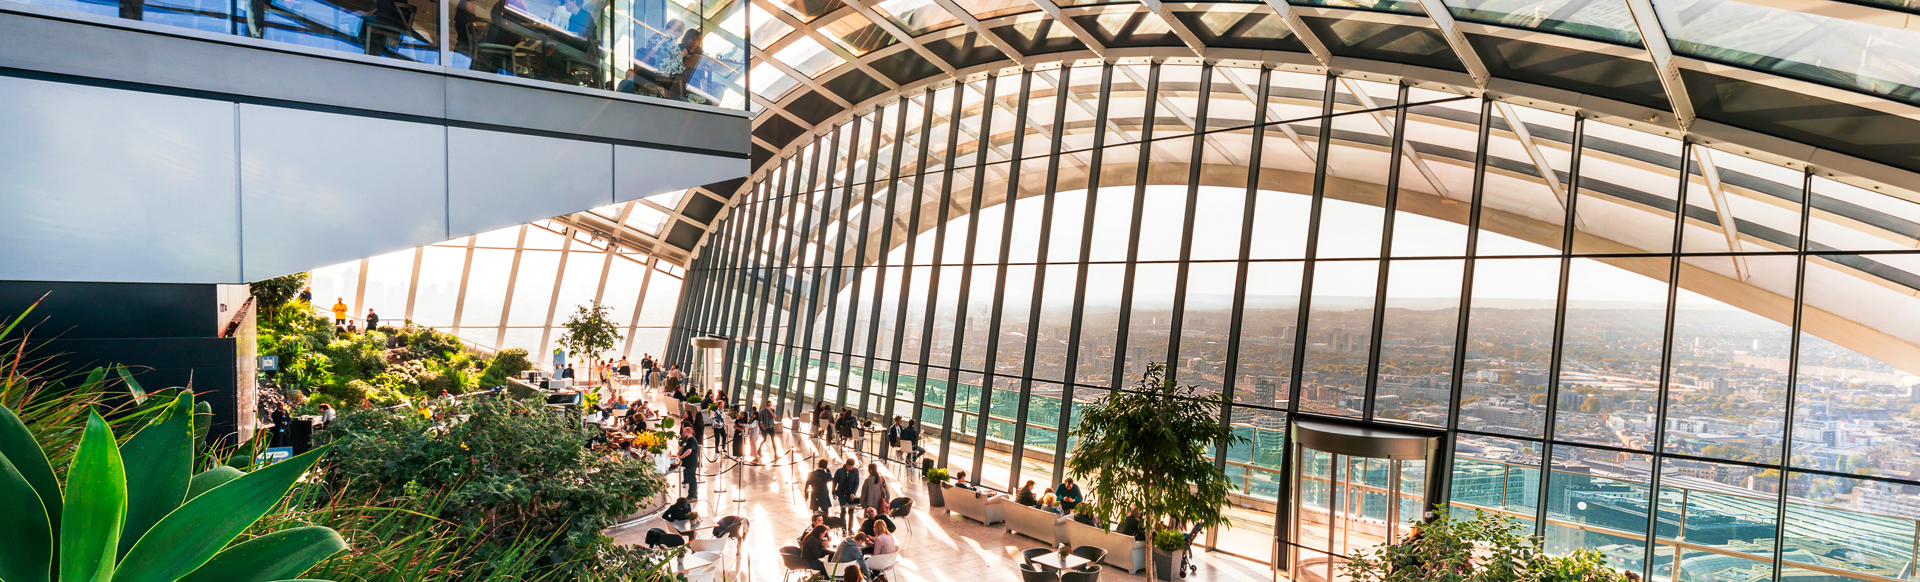 Sky Garden top level, with green plants in the front and a beautiful view over the city.